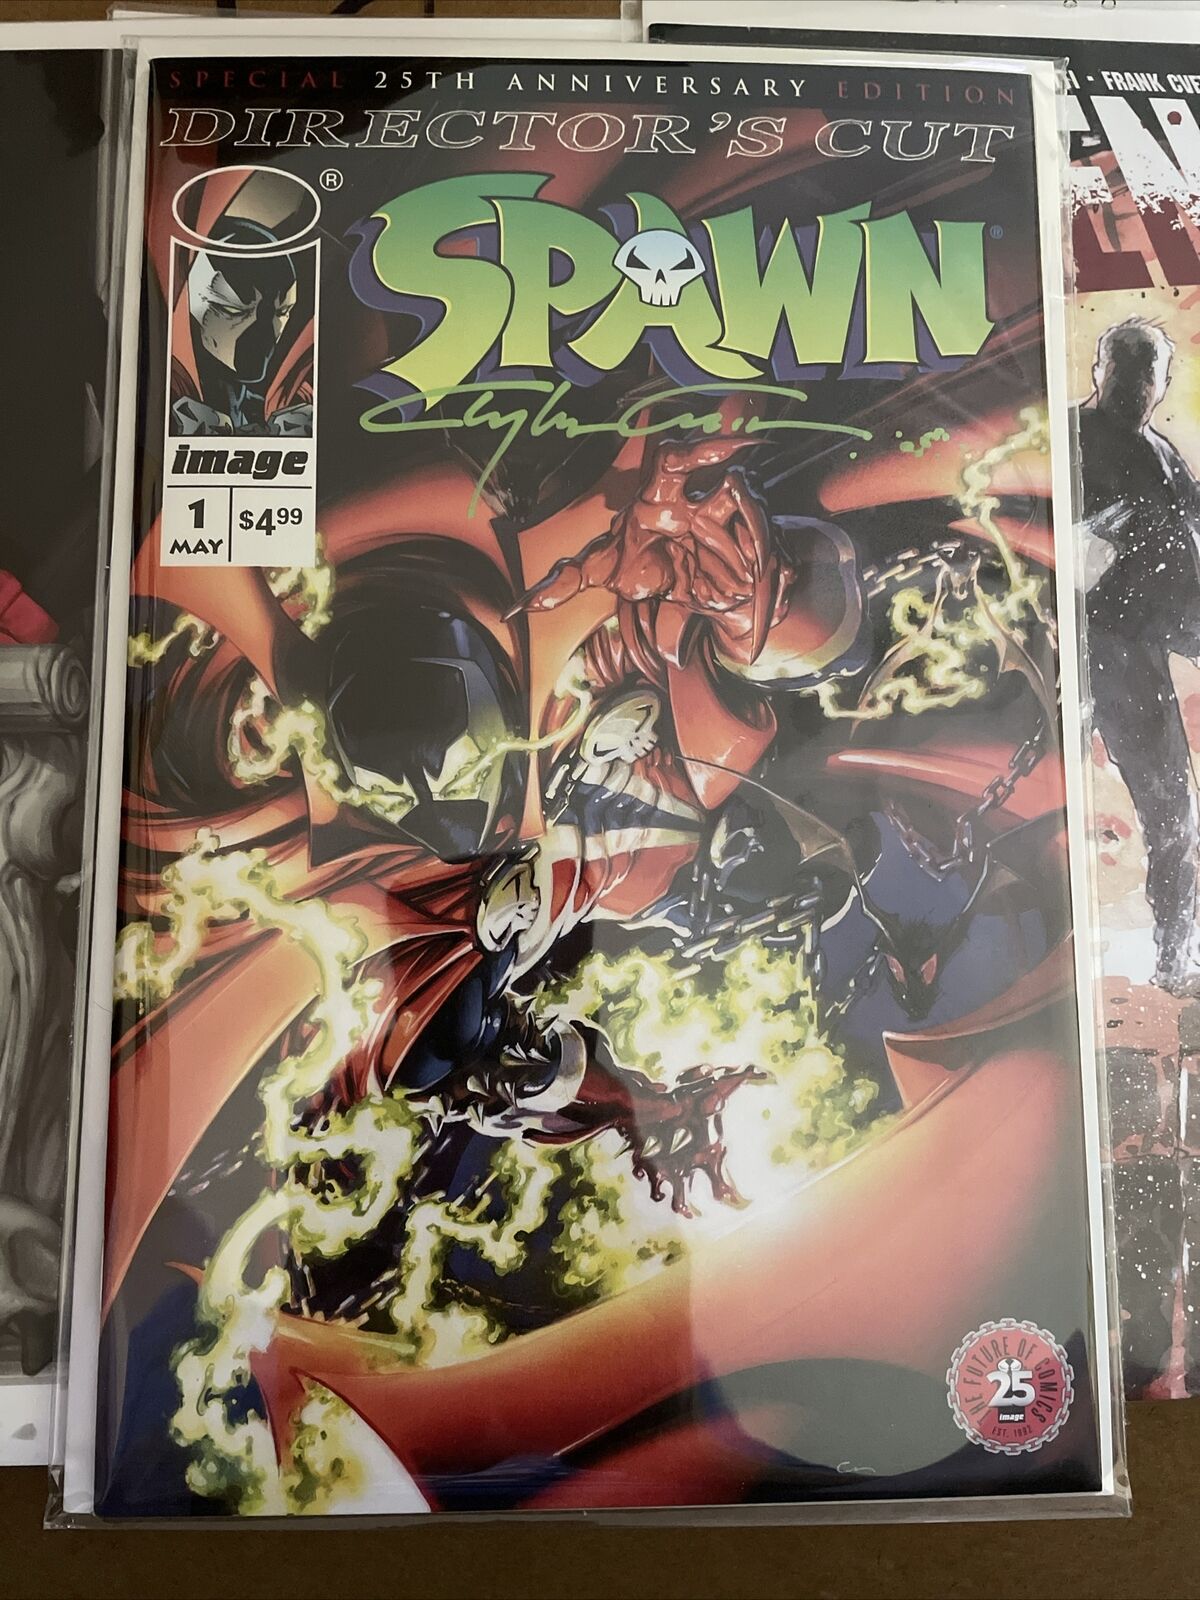 Signed Spawn #1 25th Anniversary Clayton Crain Director's Cut Image 2017